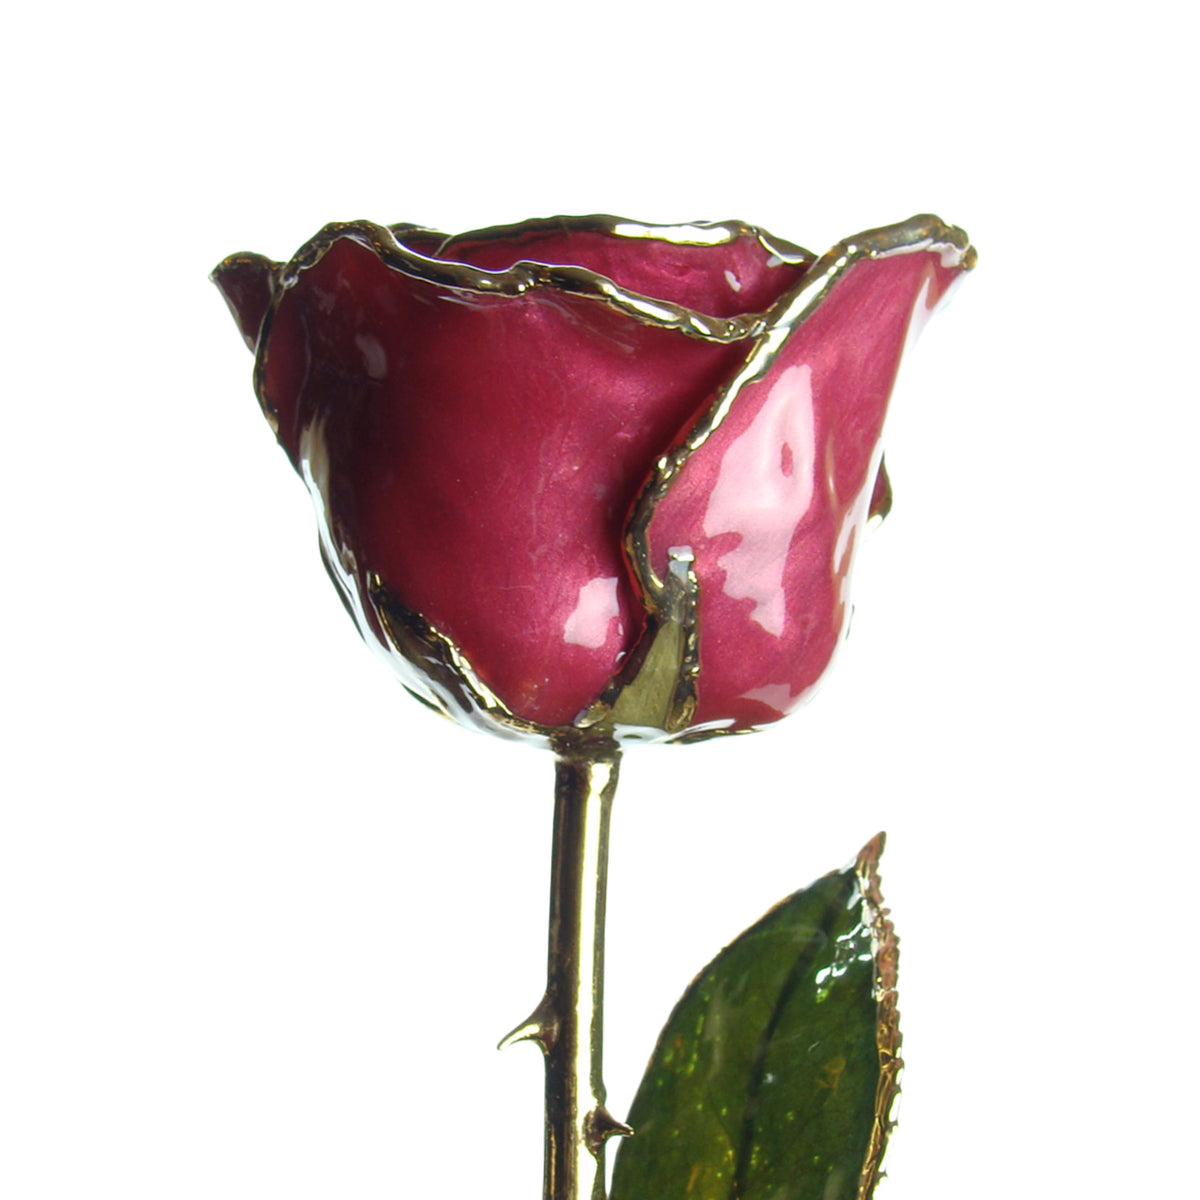 24K Gold Trimmed Forever Rose in Beating Hearts Color View of Stem, Leaves, and Rose Petals and Showing Detail of Gold Trim